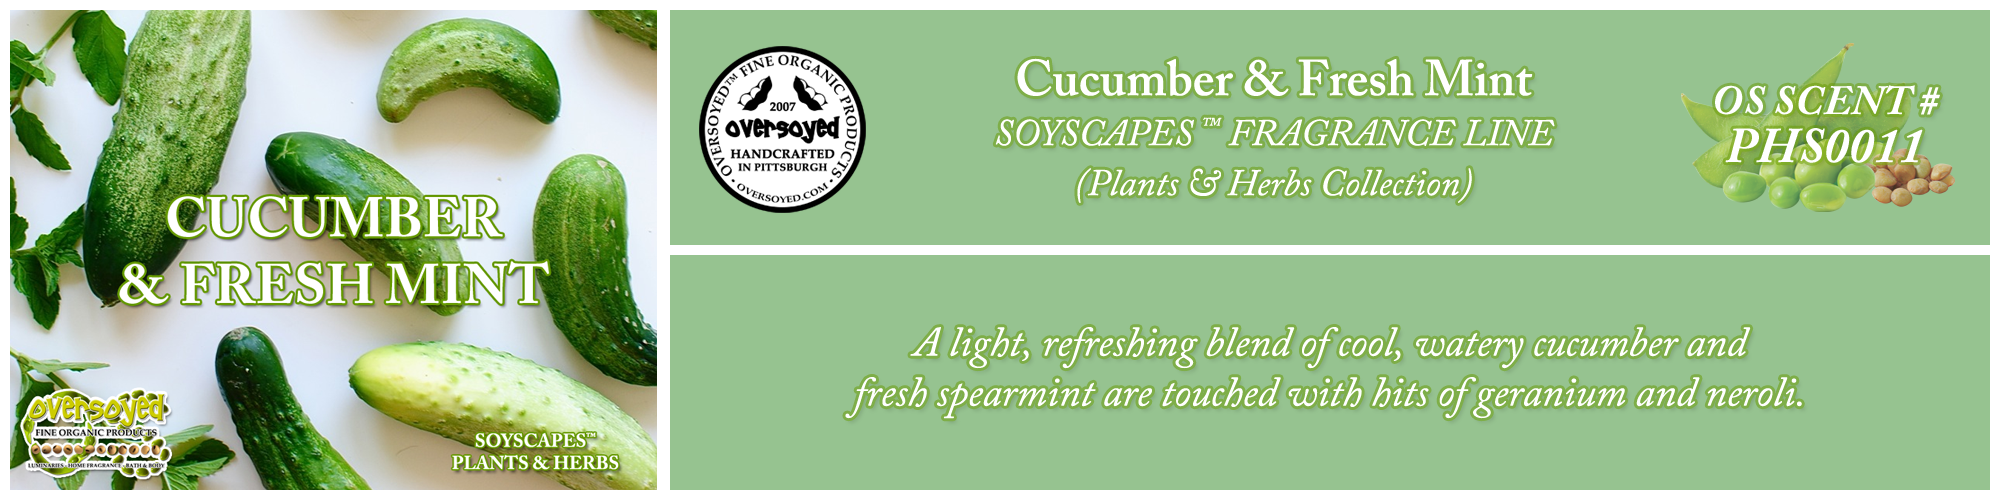 Cucumber & Fresh Mint Handcrafted Products Collection